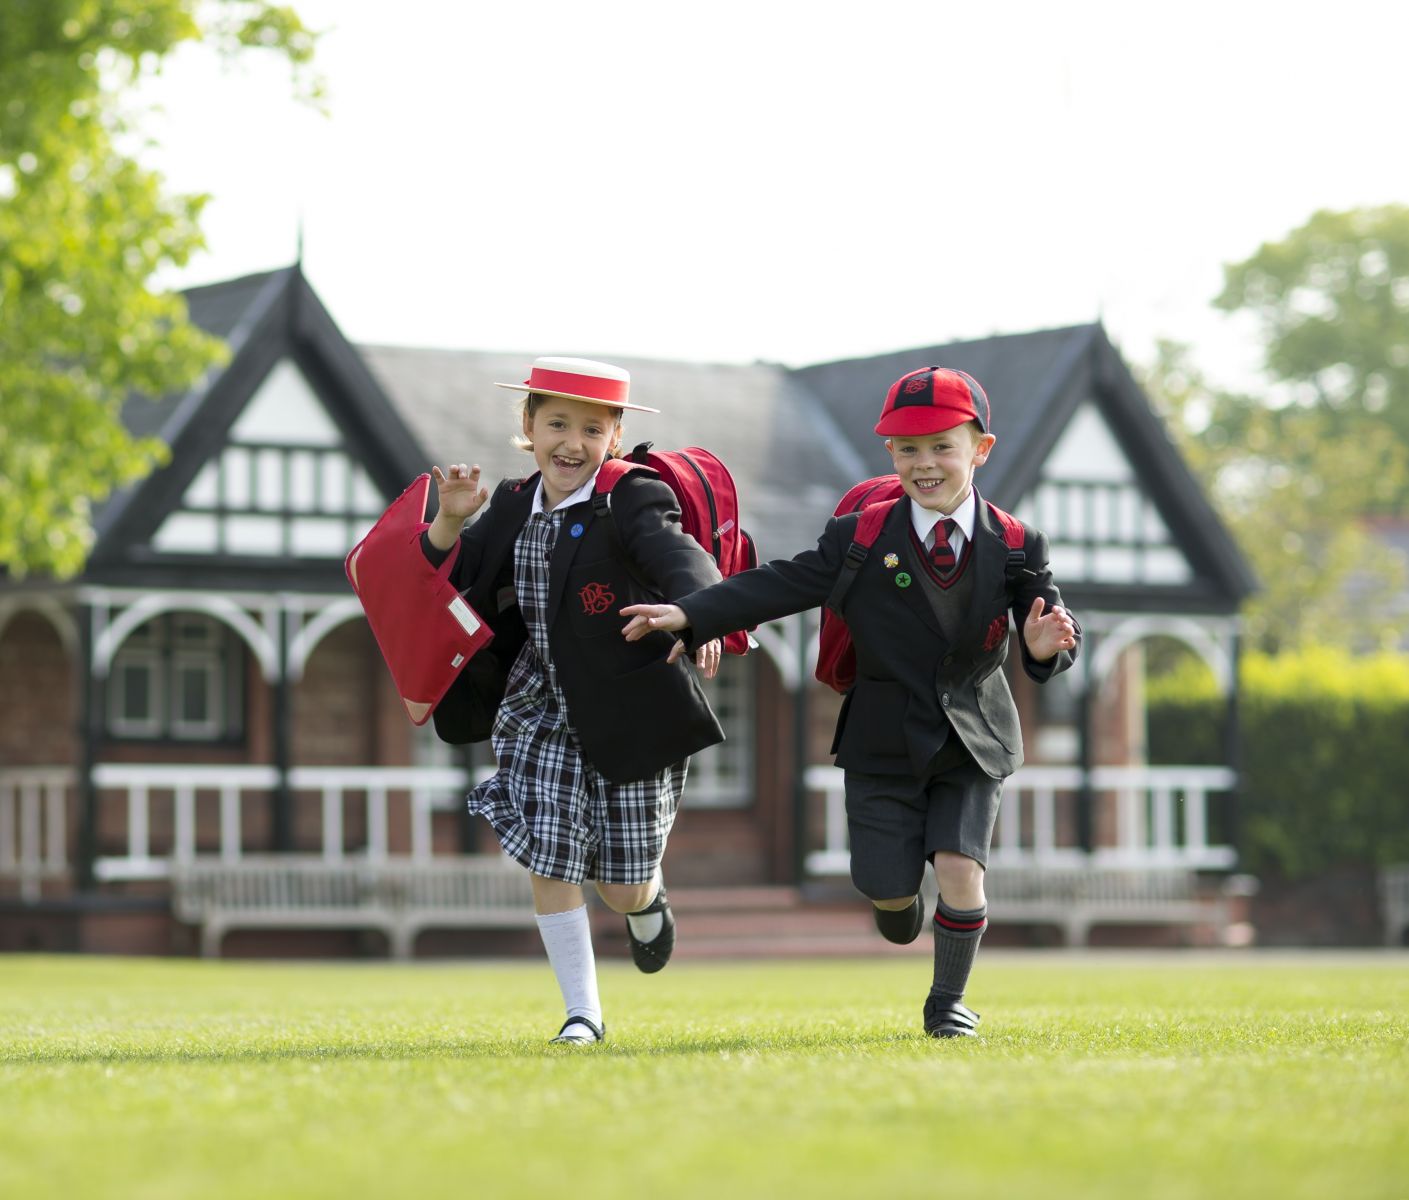 Birkenhead School - A leading independent day school for girls and boys  from Nursery to Sixth Form.